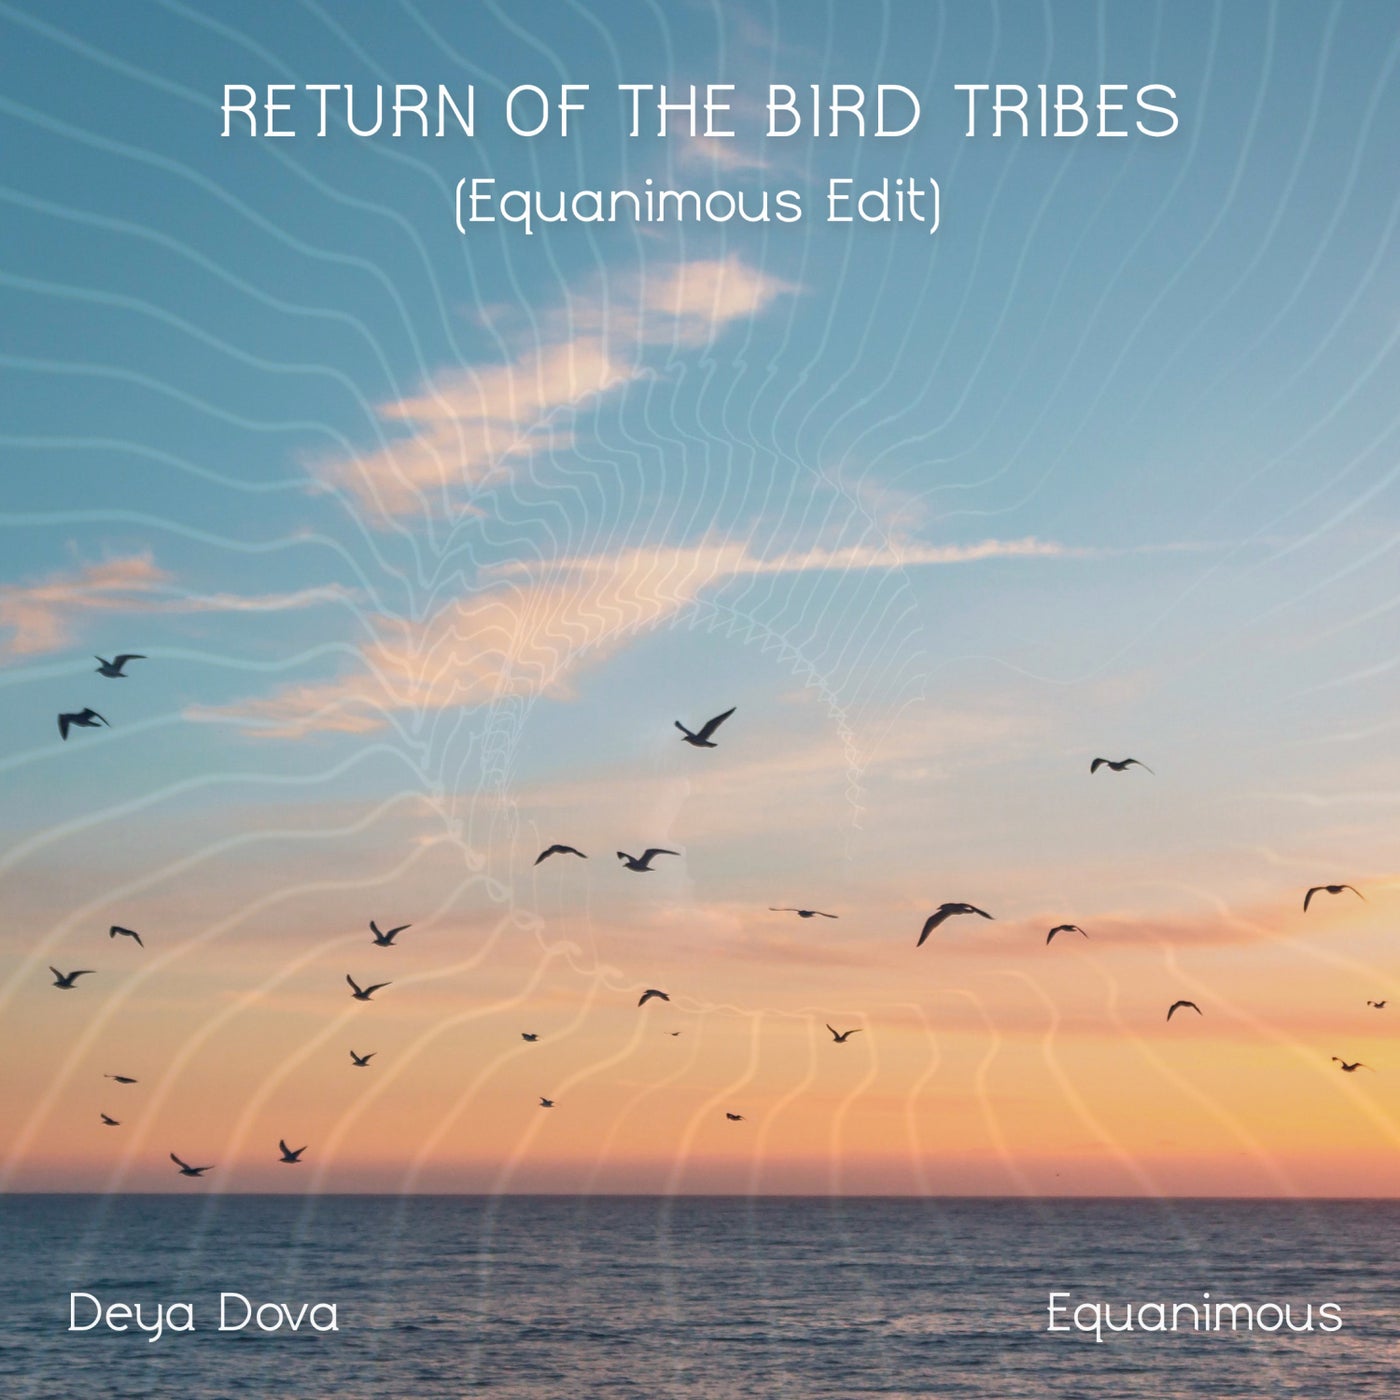 Return of the Bird Tribes (Equanimous Edit)